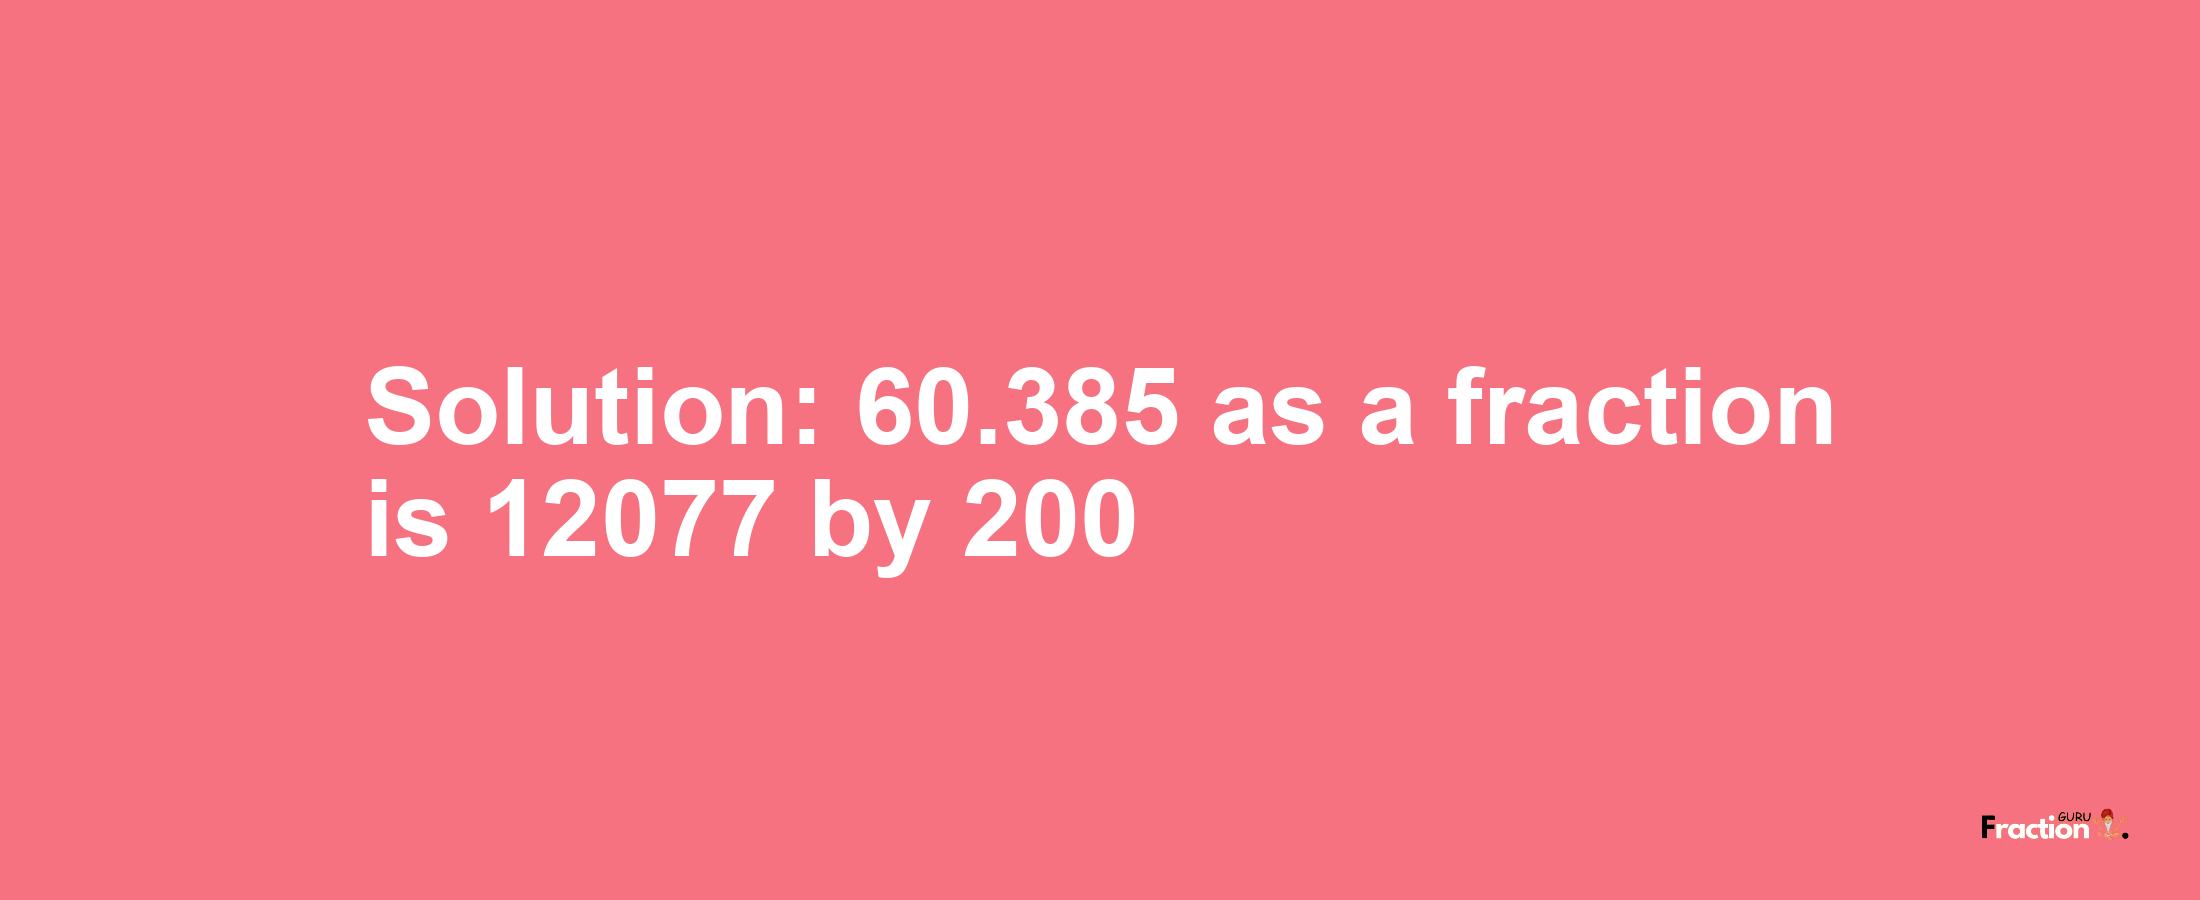 Solution:60.385 as a fraction is 12077/200